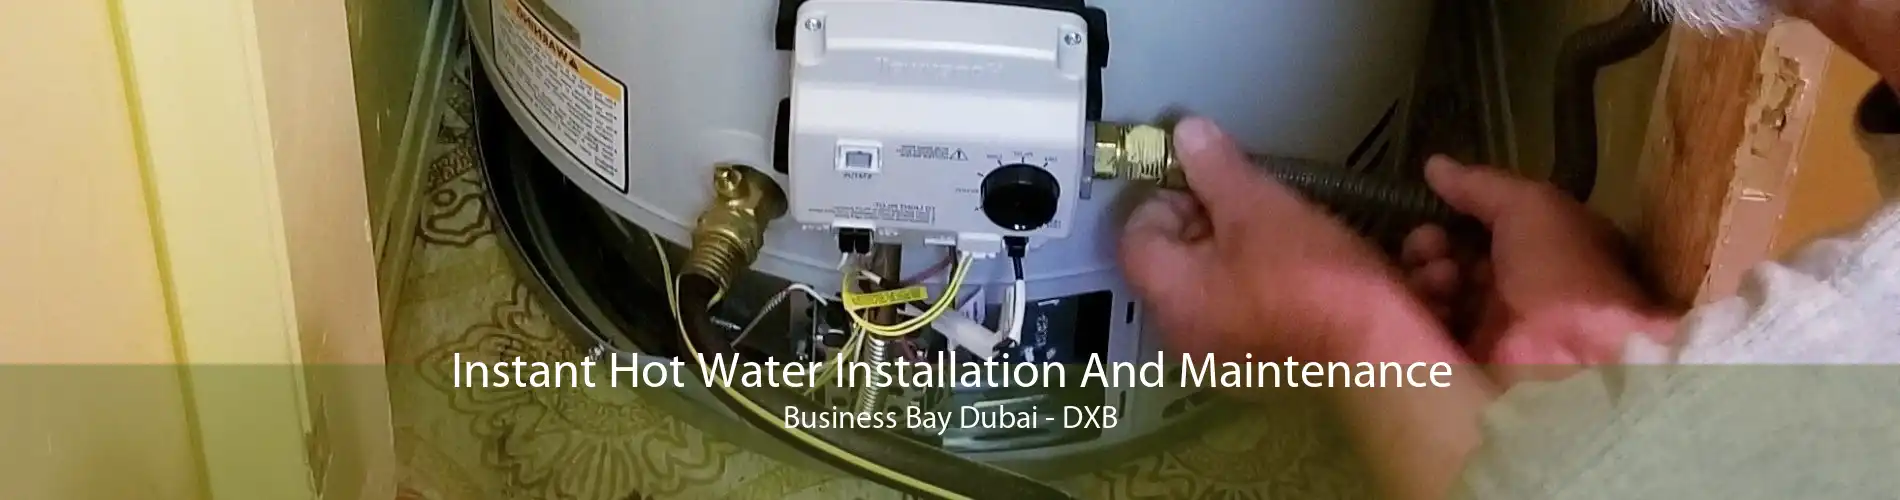 Instant Hot Water Installation And Maintenance Business Bay Dubai - DXB